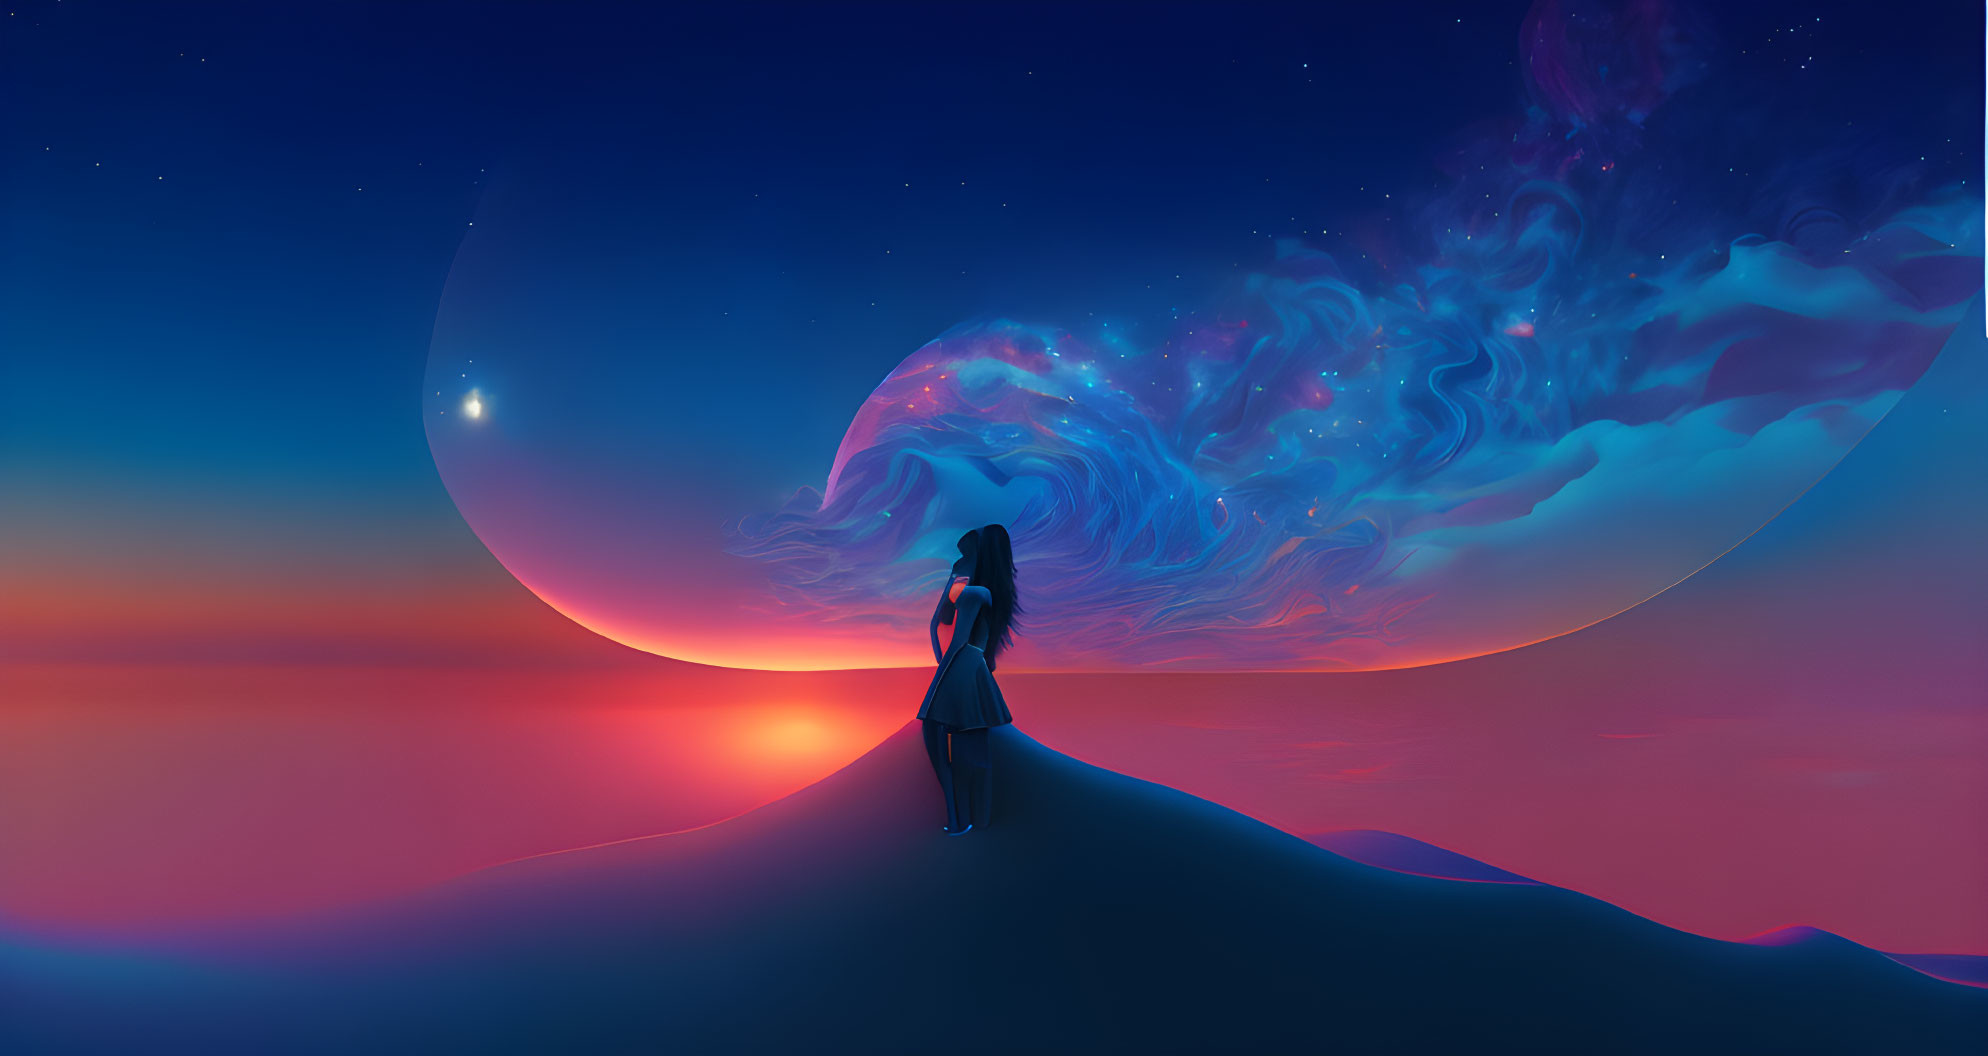 Silhouetted Figure on Dune Under Surreal Sky with Giant Planet and Nebula